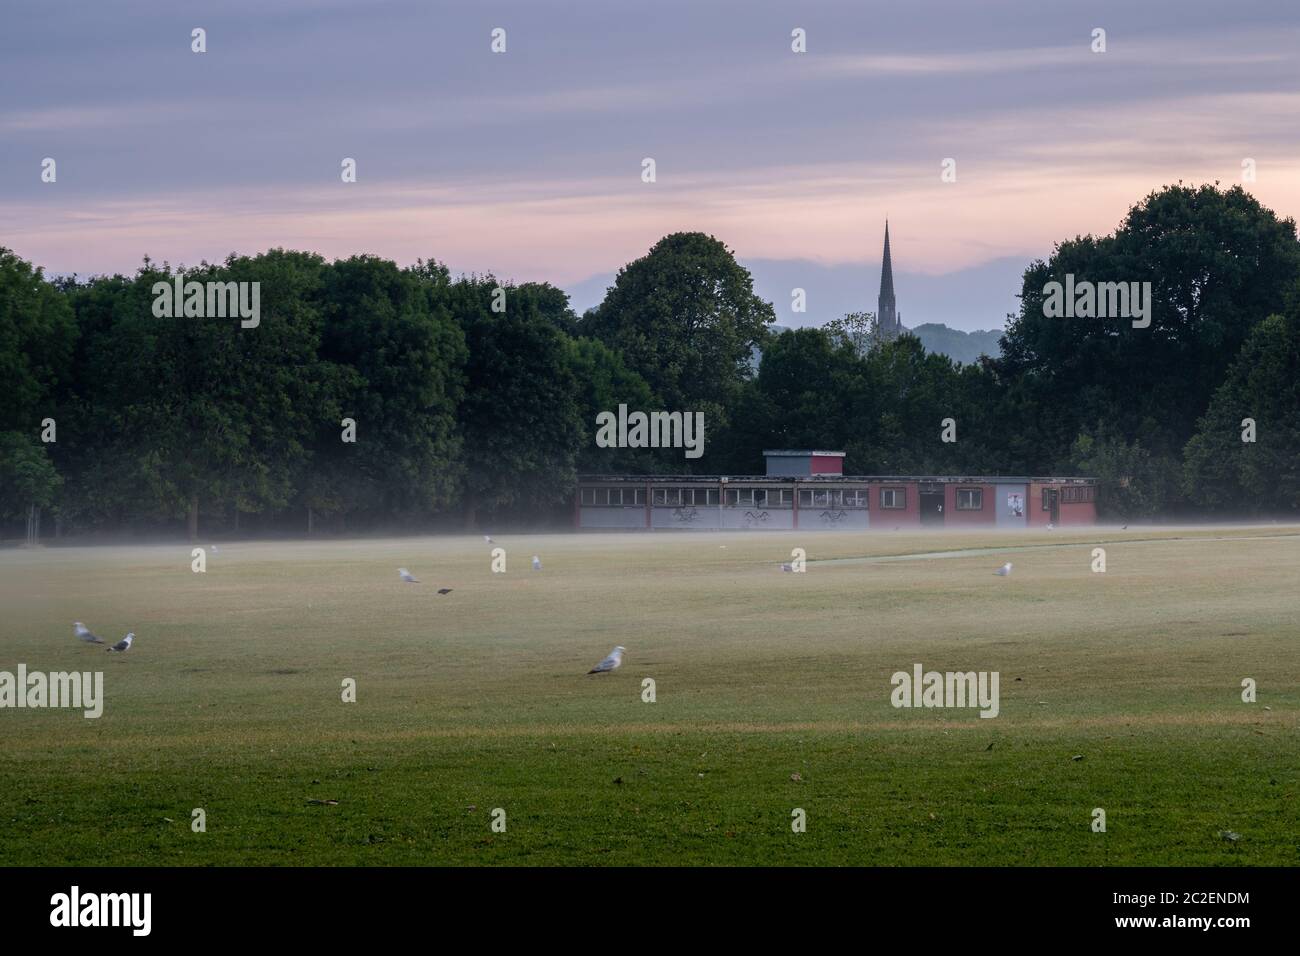 Mist rises from the playing field of Eastville Park at dawn in North Bristol, with Stapleton Church spire in the distance. Stock Photo